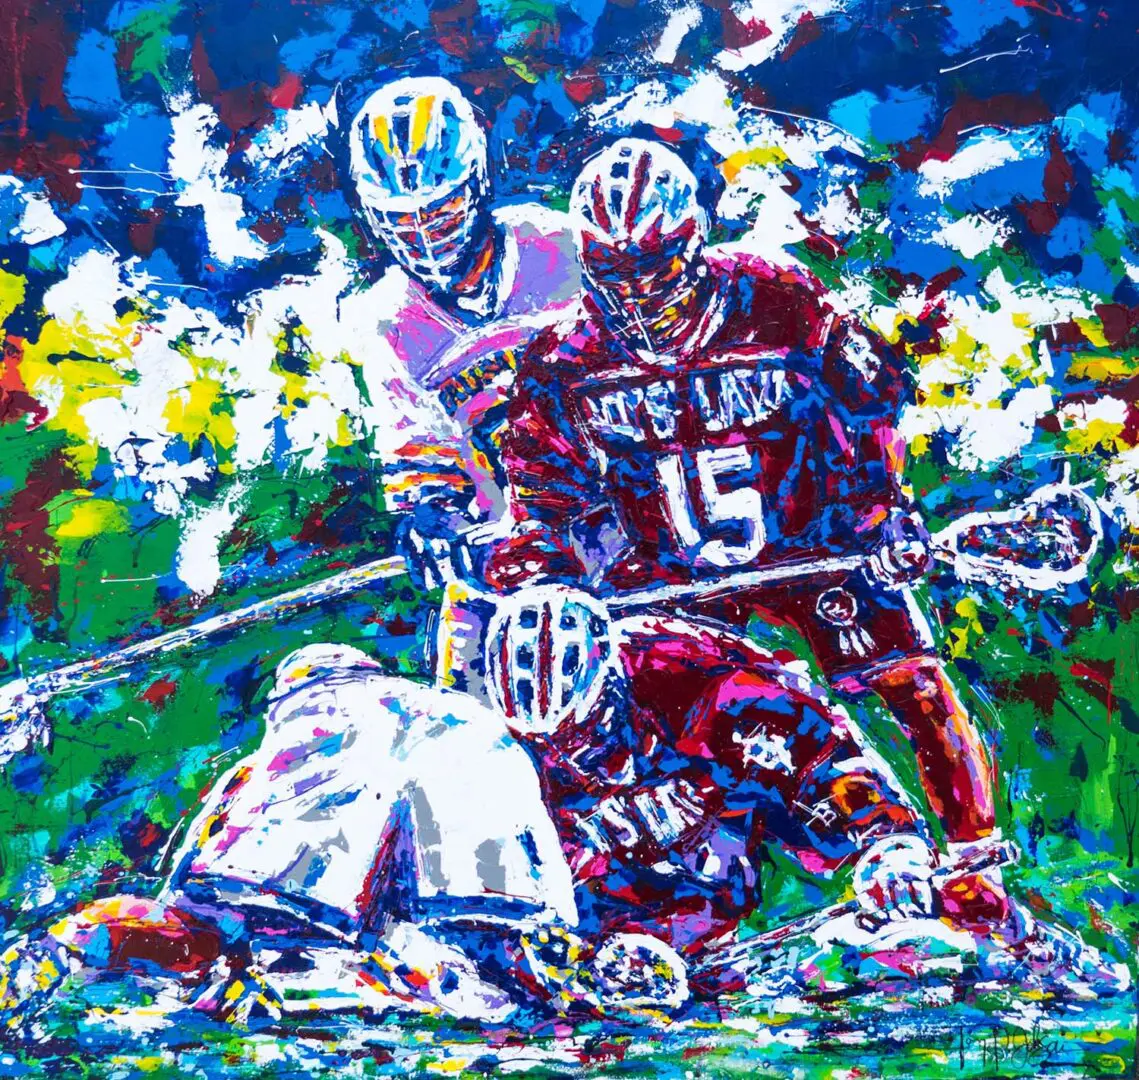 A painting of lacrosse players in action.